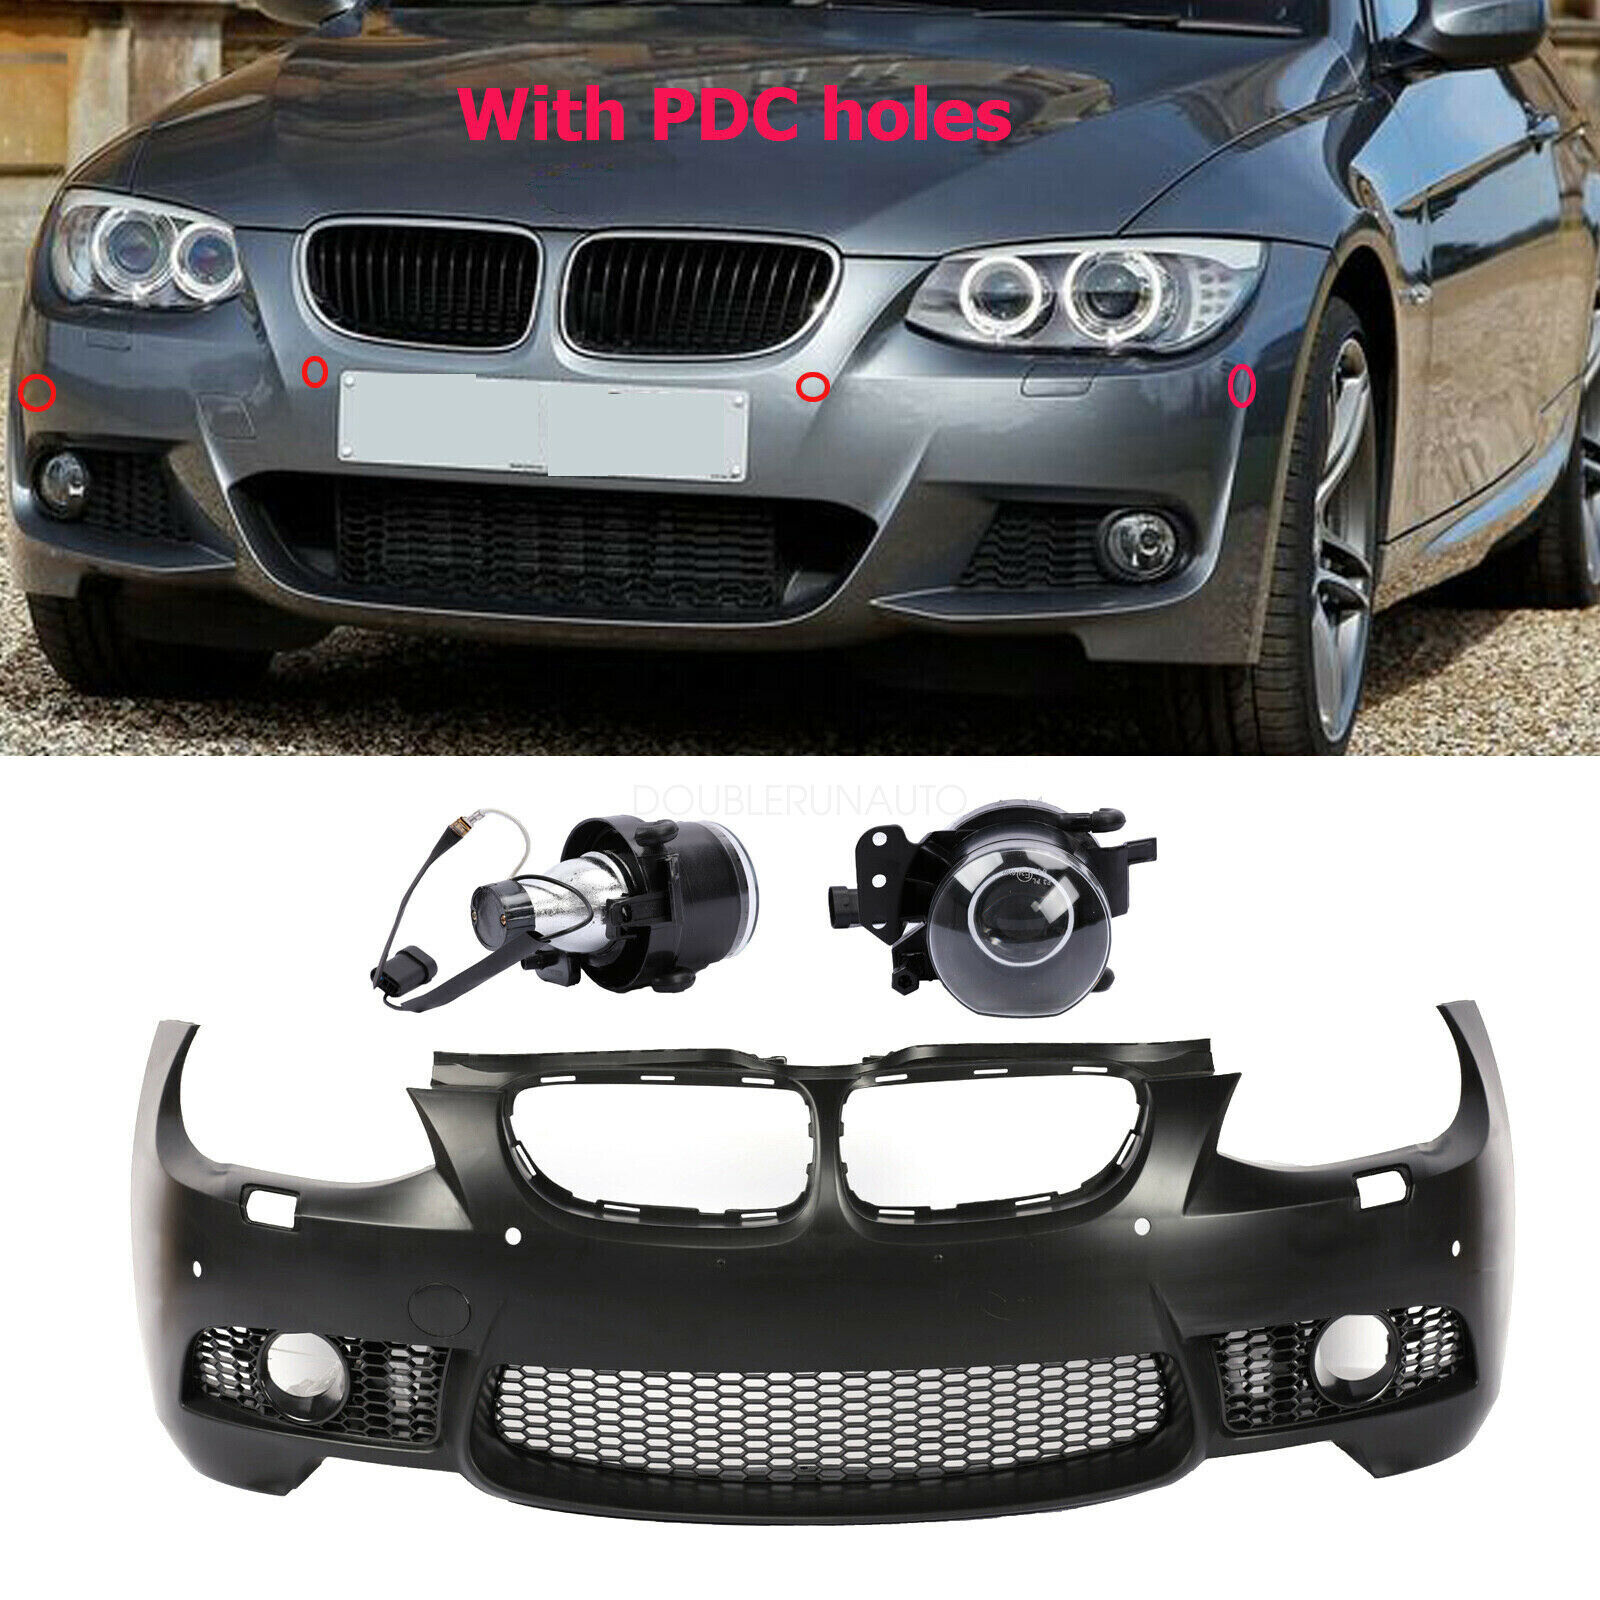 M3 Style Front Bumper Kit W/ PDC For 10-13 BMW E92 E93 3-Series 335 W/ fog light